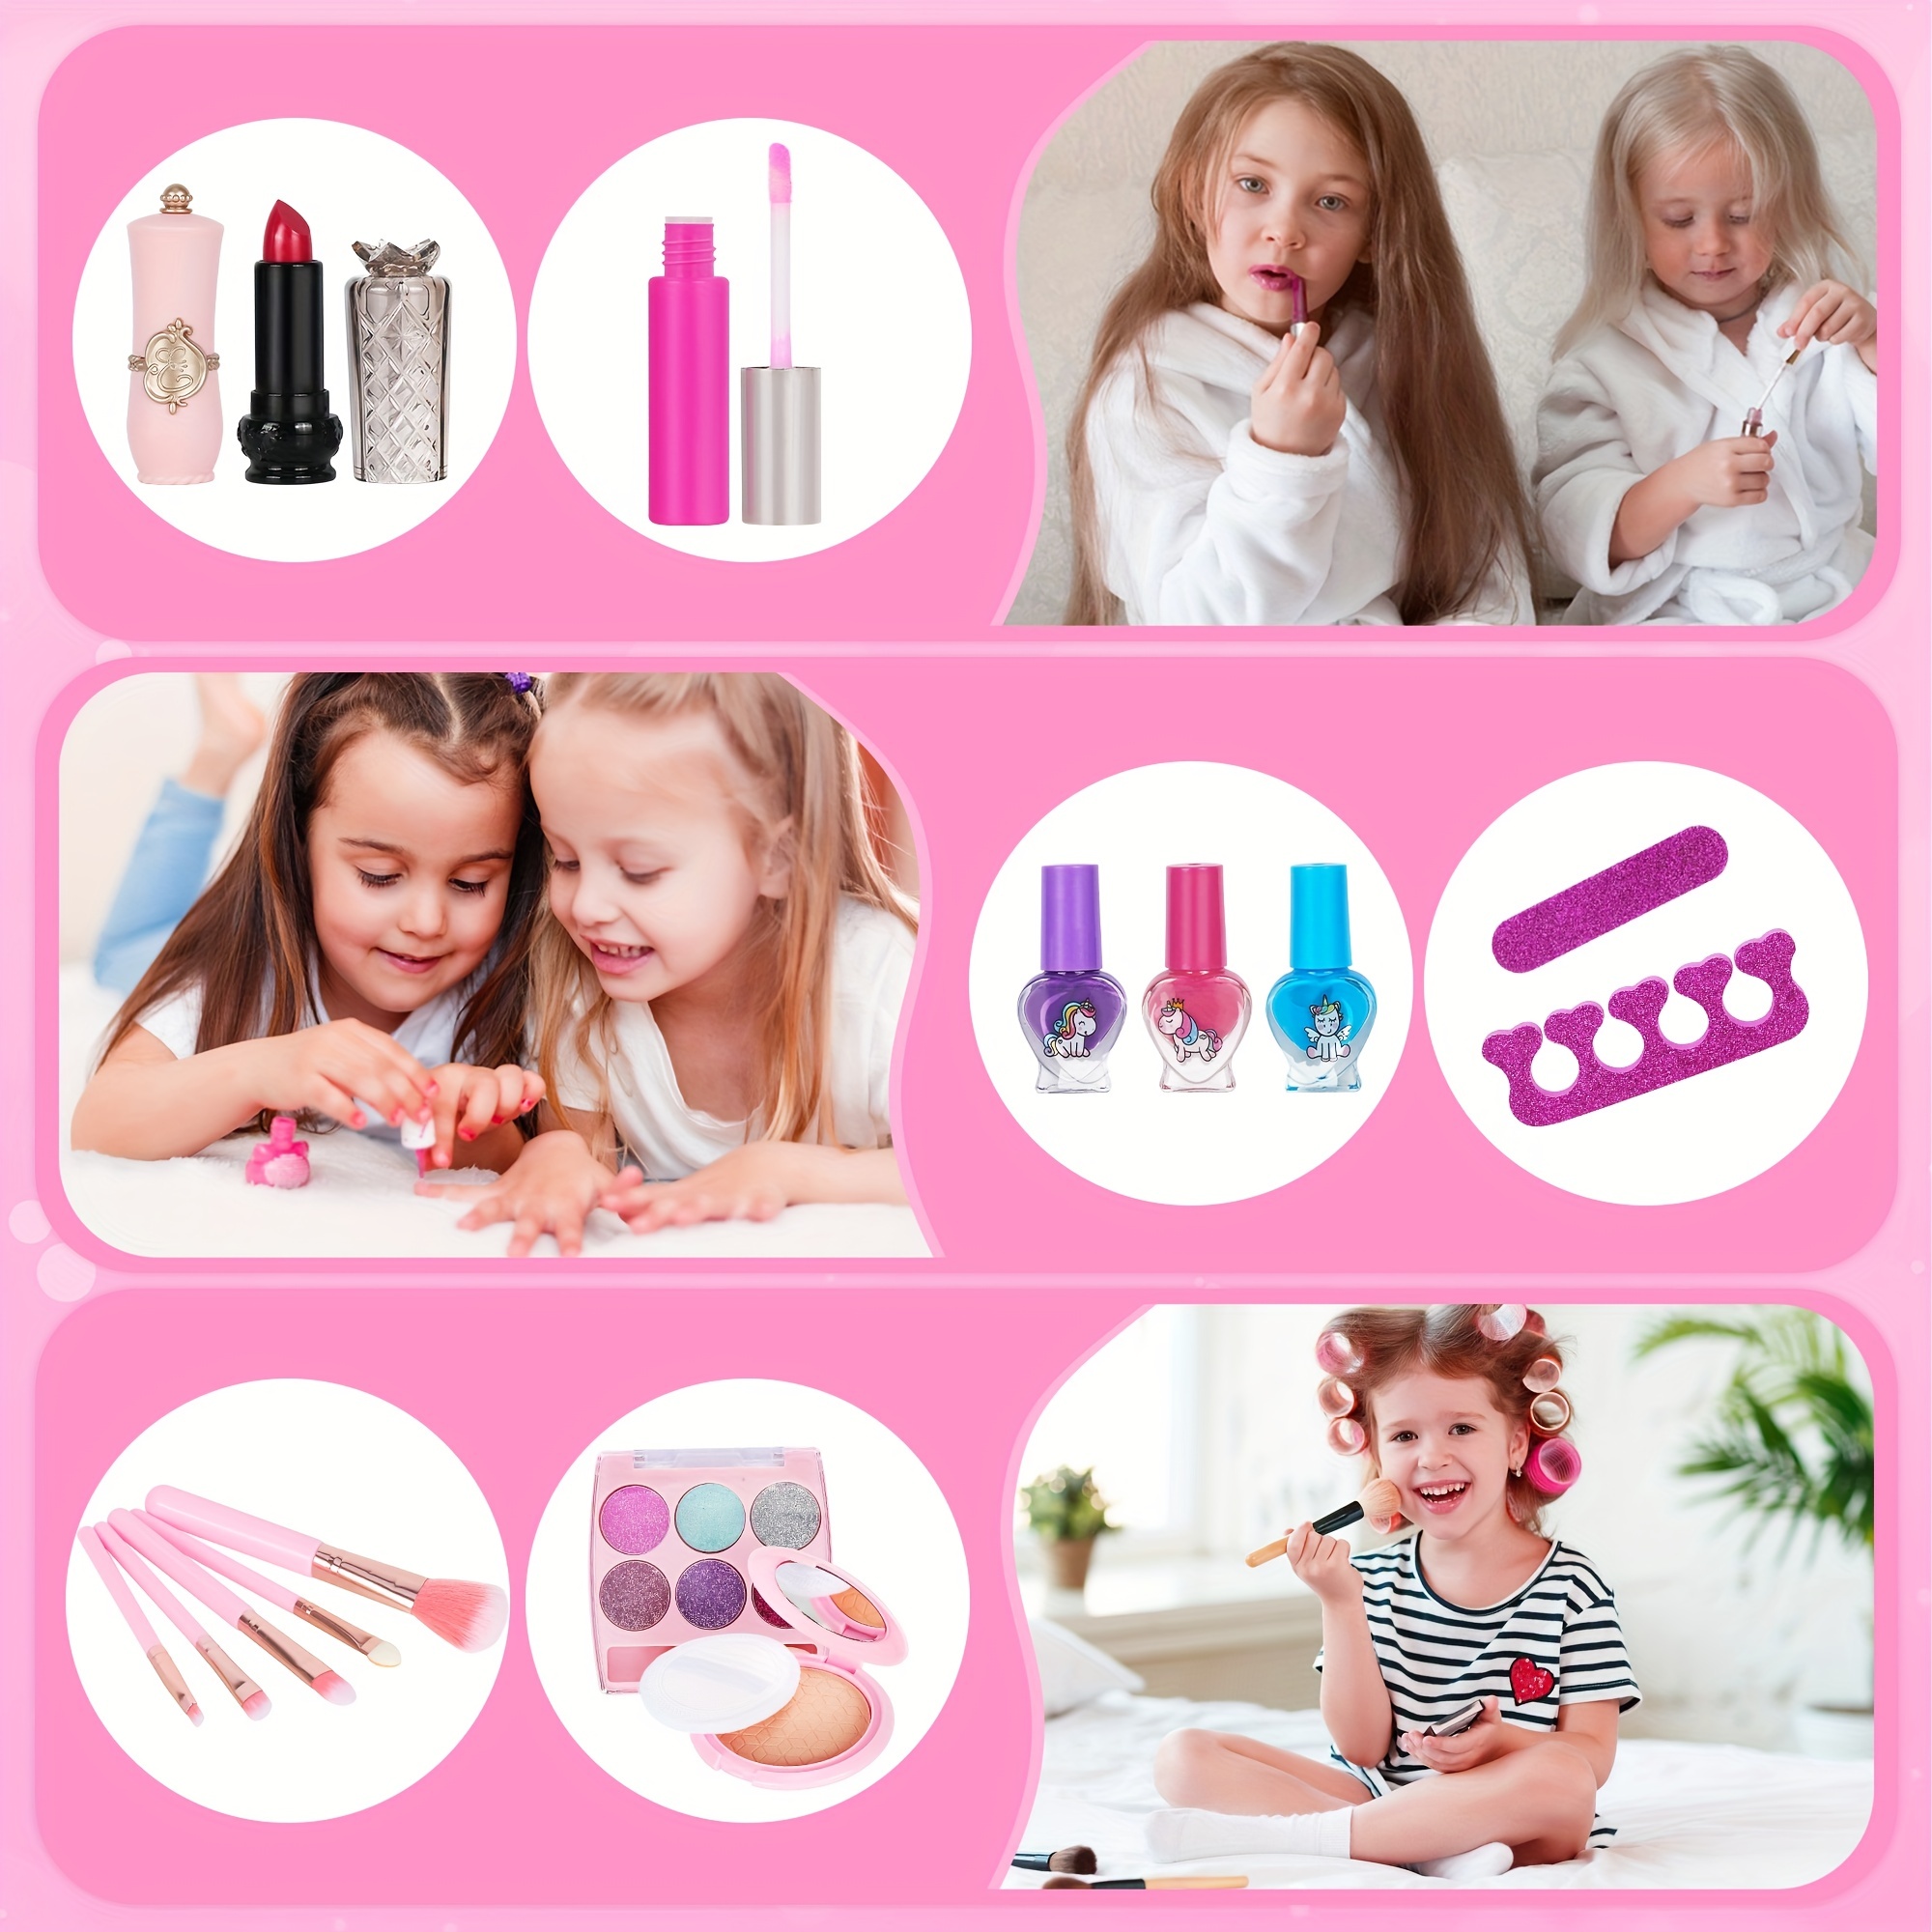 Gifts for Young Girls - Ages 6, 7, 8